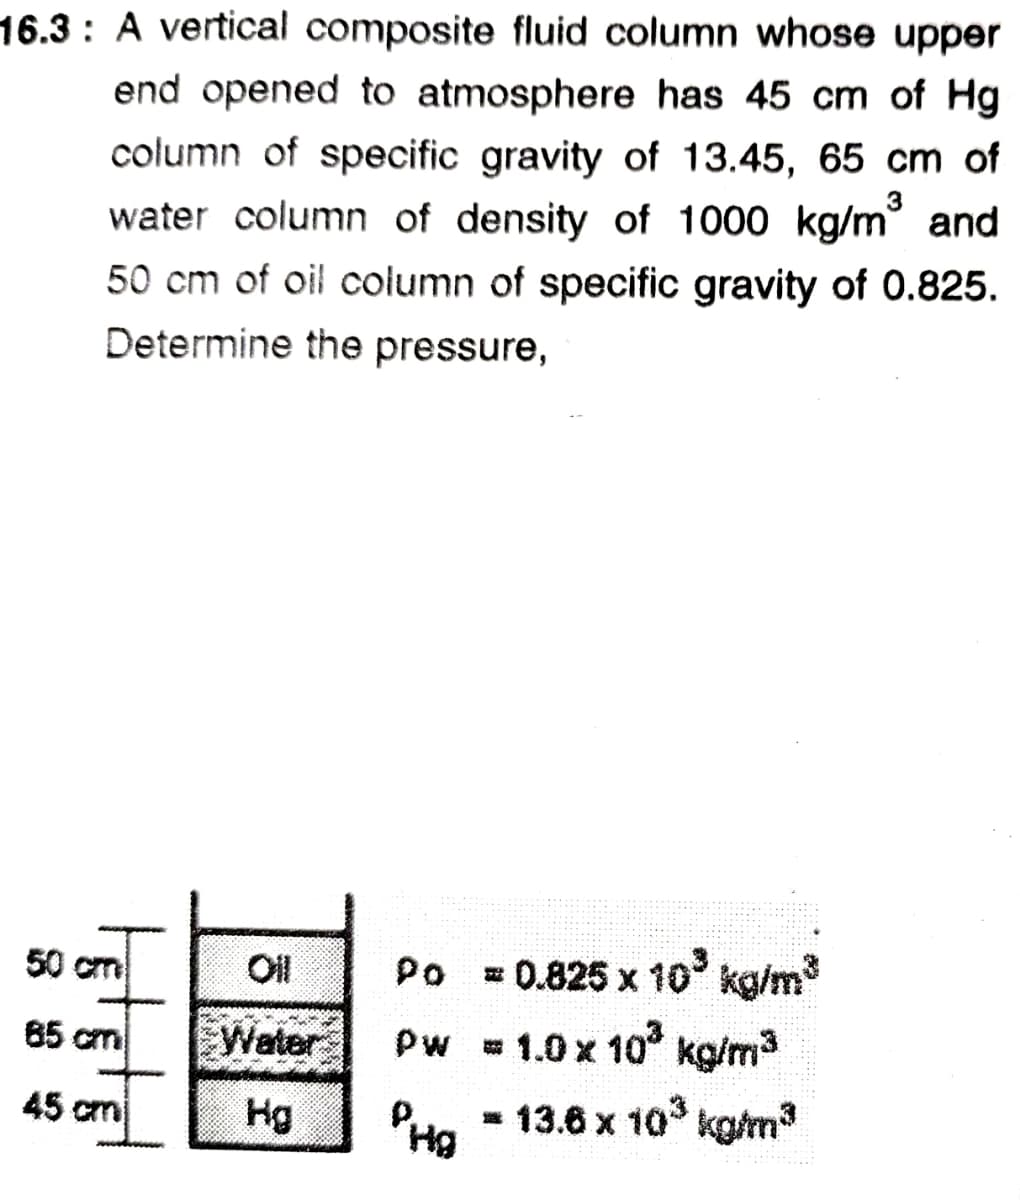 16.3: A vertical composite fluid column whose upper
end opened to atmosphere has 45 cm of Hg
column of specific gravity of 13.45, 65 cm of
water column of density of 1000 kg/m and
50 cm of oil column of specific gravity of 0.825.
Determine the pressure,
50 cm
Ol
Po
= 0.825 x 10 kg/m
85 cm
Water
Pw = 1.0 x 10 kg/m3
45 cm
Hg
P,
- 13.6 x 10° kg/m
Hg
